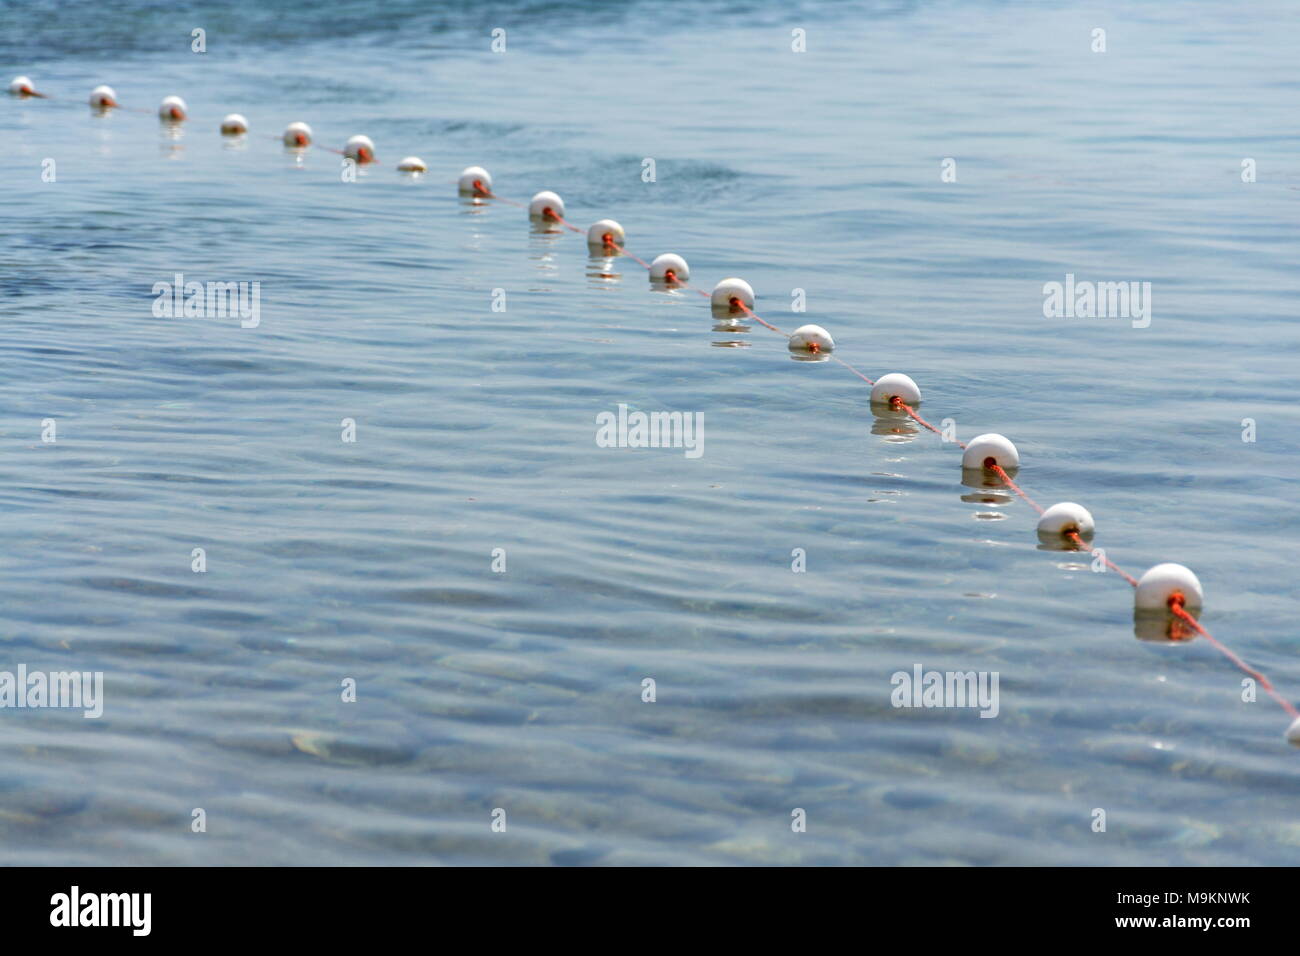 Buoys on fish net floating on surface of water Stock Photo